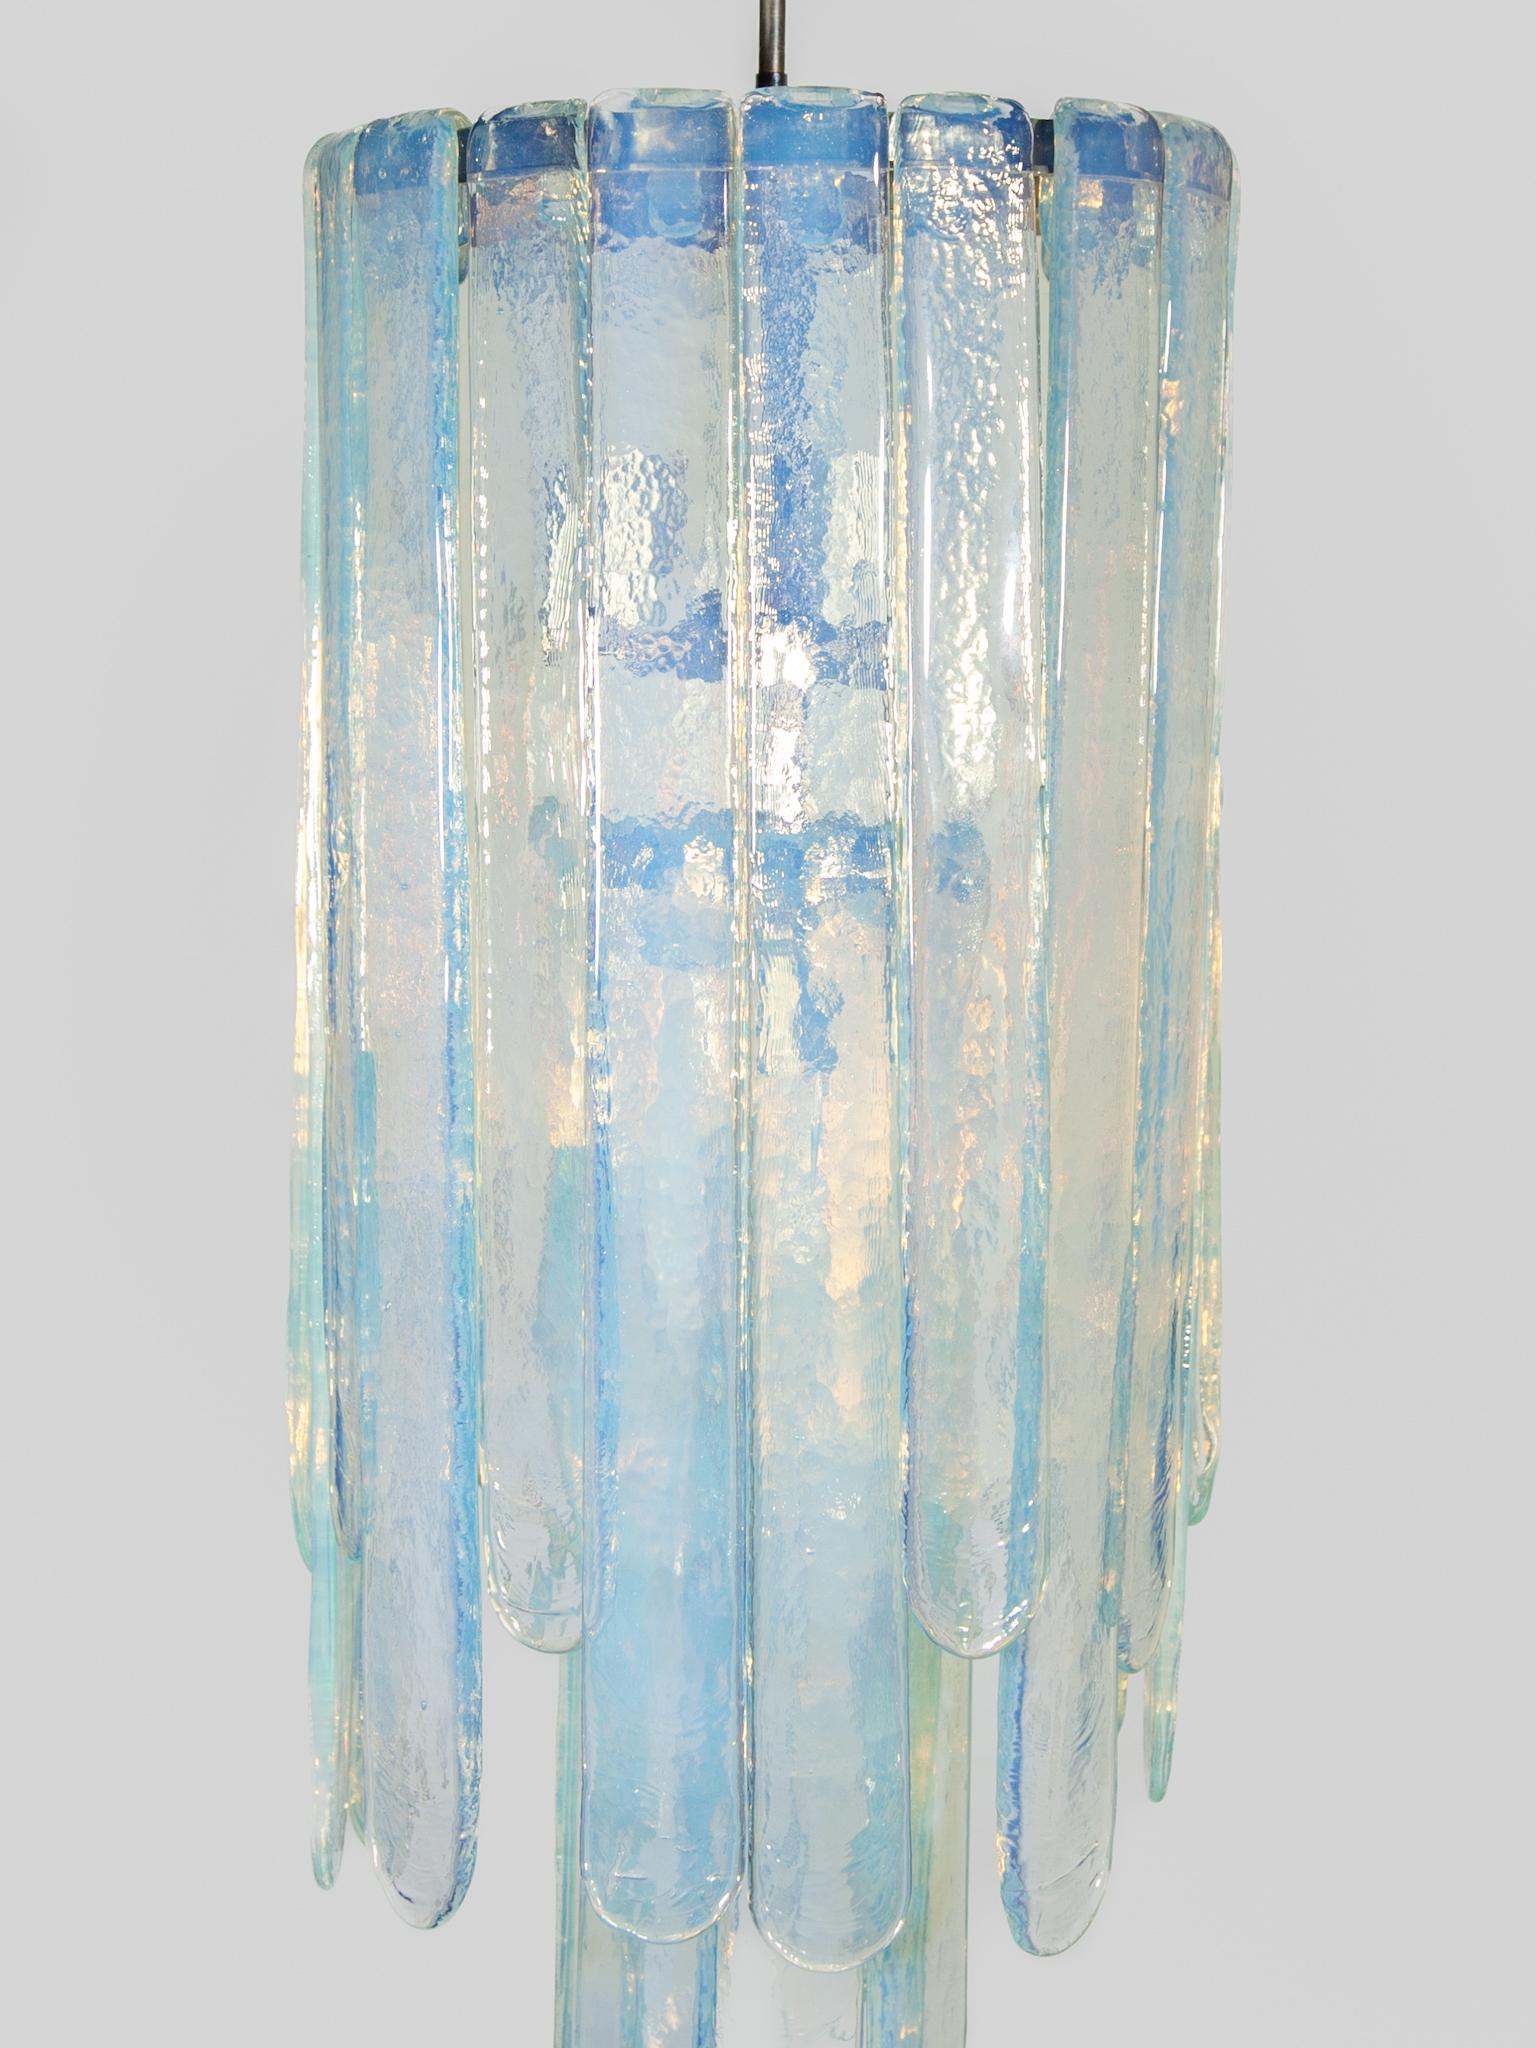 Hand-Crafted Opalescent Glass Chandelier designed by Carlo Nason for Mazzega, 1960s For Sale